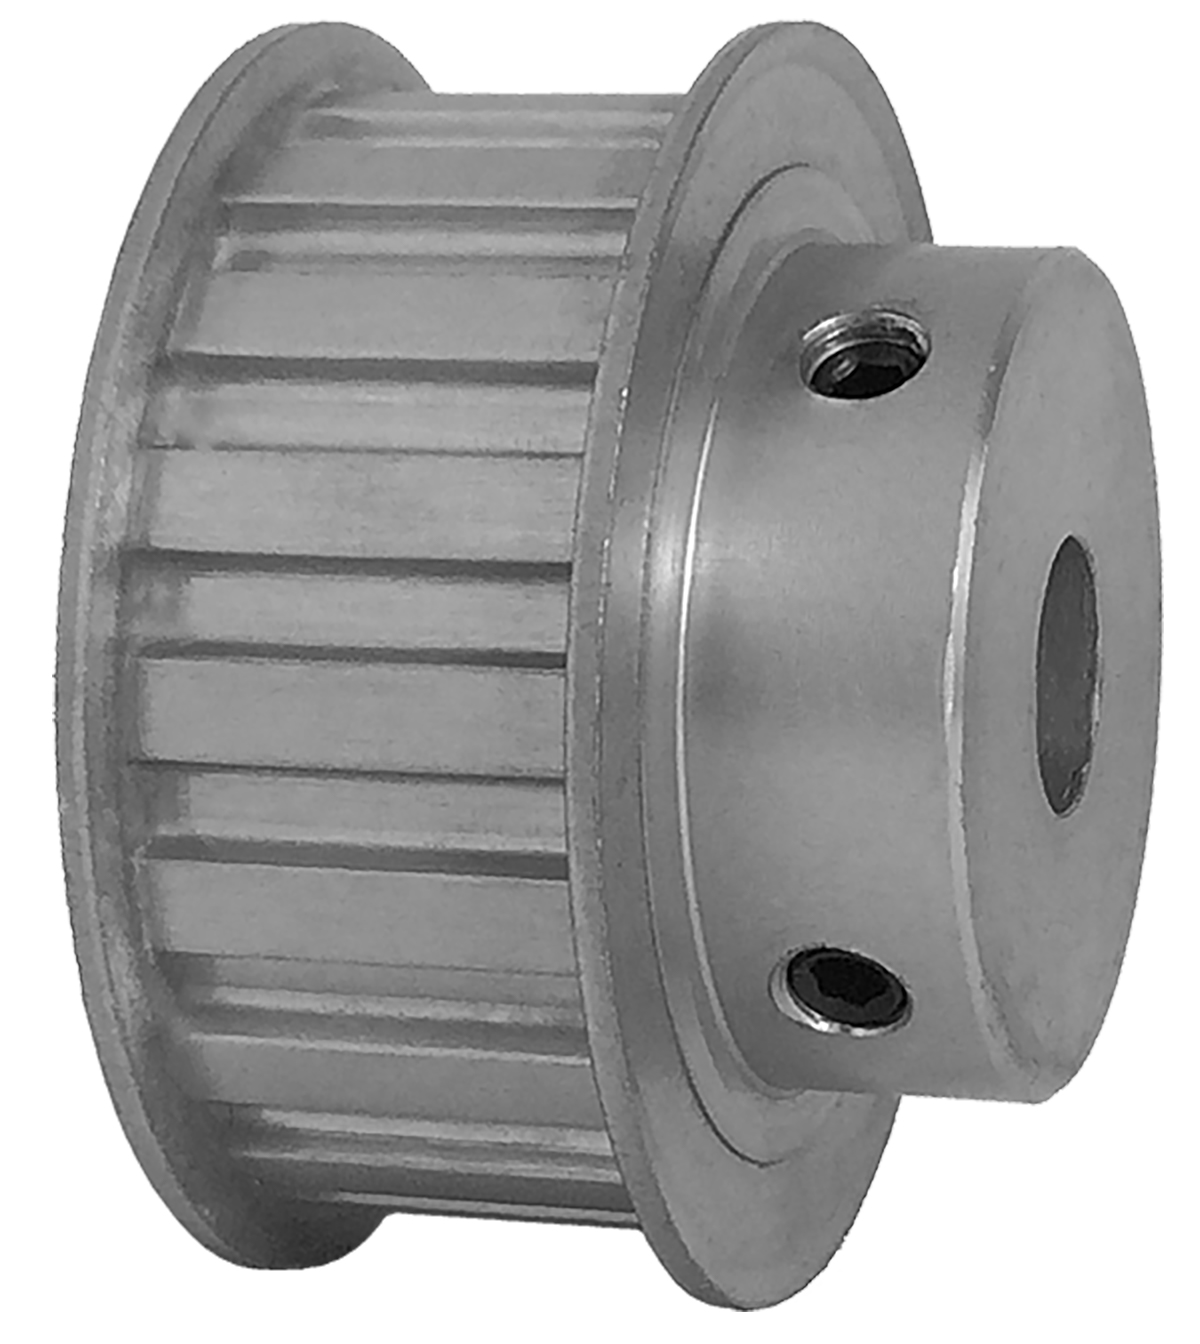 18L075-6FA6 - Aluminum Imperial Pitch Pulleys